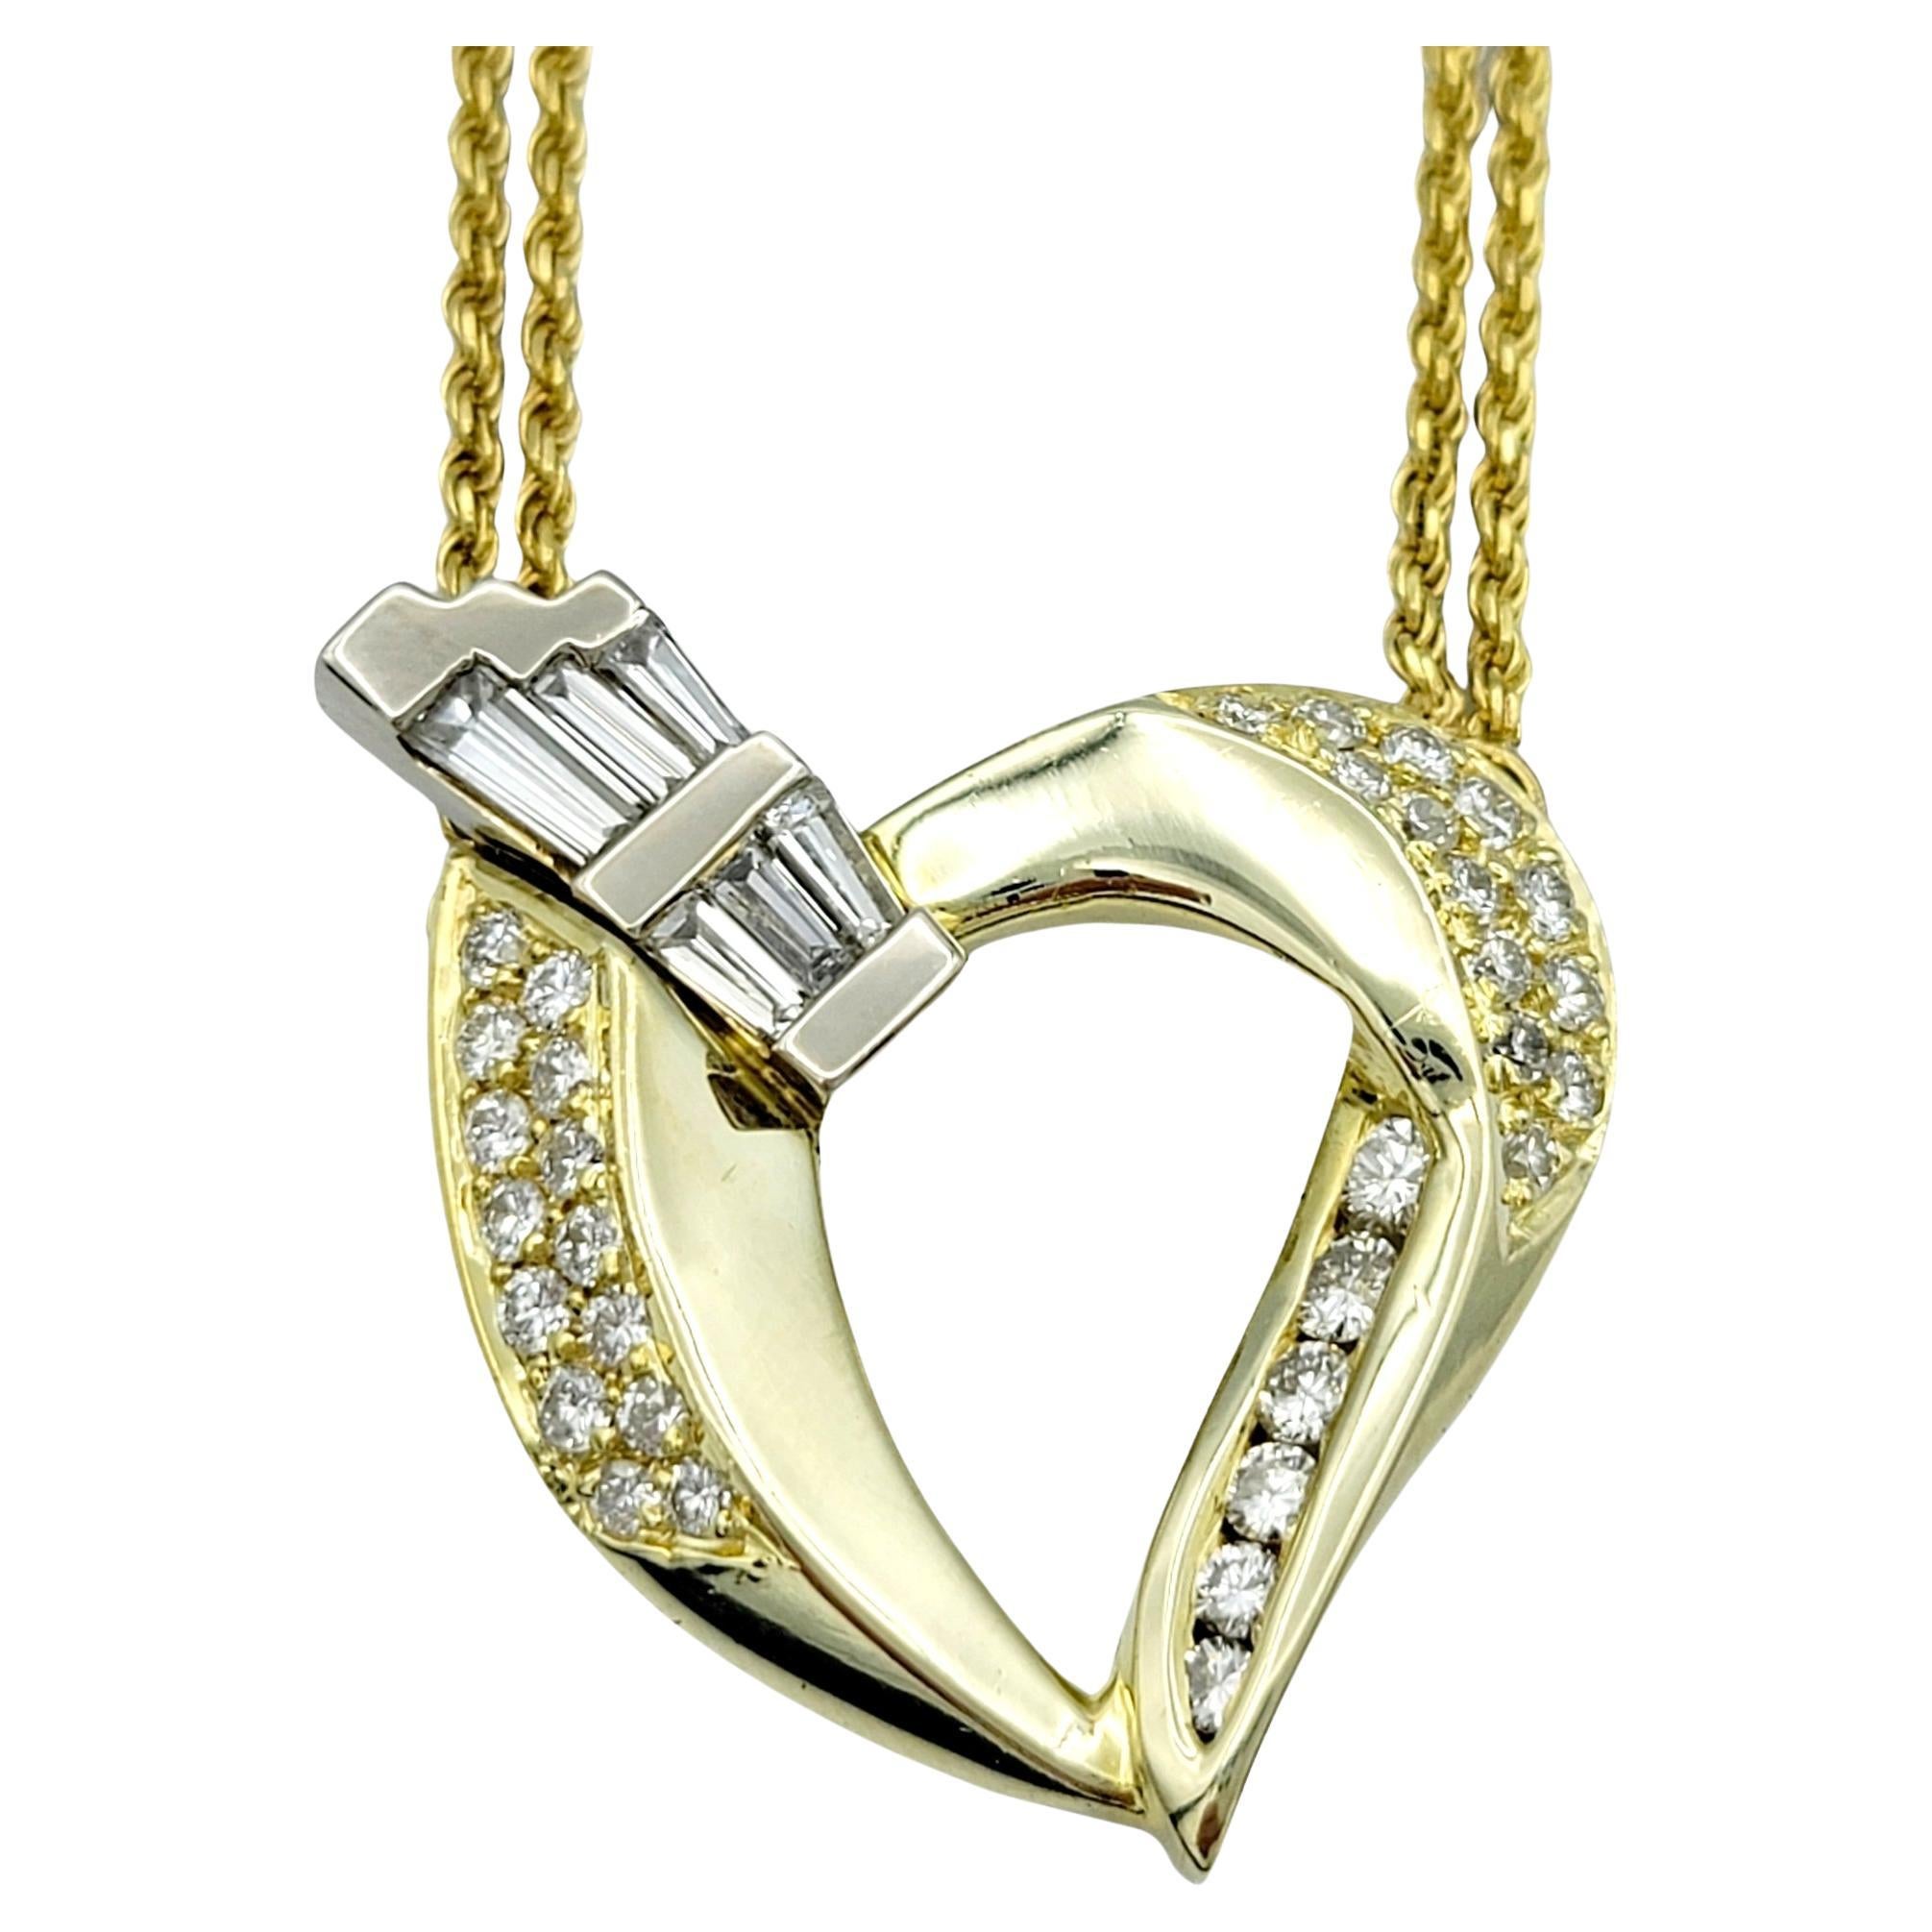 This 14 karat yellow gold necklace is a striking testament to elegance and glamour. Its centerpiece is a stationary open heart pendant, a symbol of enduring love and boundless affection. The pendant is adorned with a dazzling array of round and